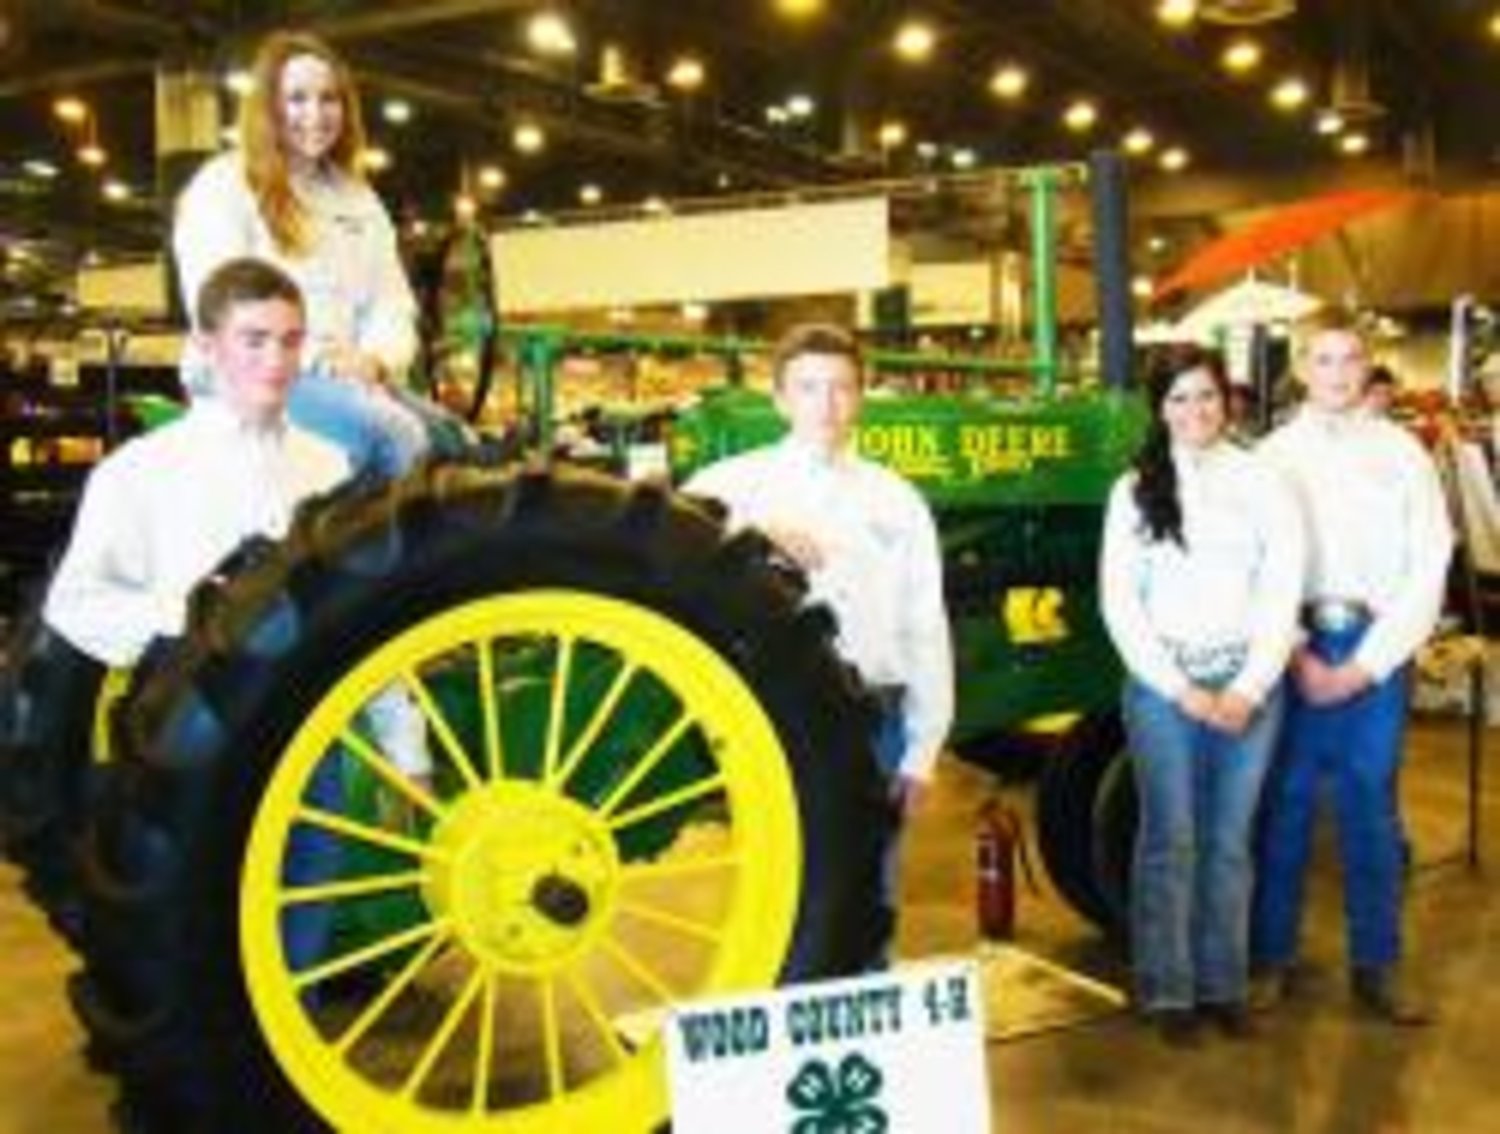 The Wood County 4-H Tractor Restoration Spin Club recently refurbished a John Deere tractor and showed it in Houston at the Ag. Mechanics Tractor Restoration Show. The club took home a blue ribbon. From left to right: Jake Kindle, Emilee Davis, Luke Kindle, Madison Nichols and Joel Rinlee.